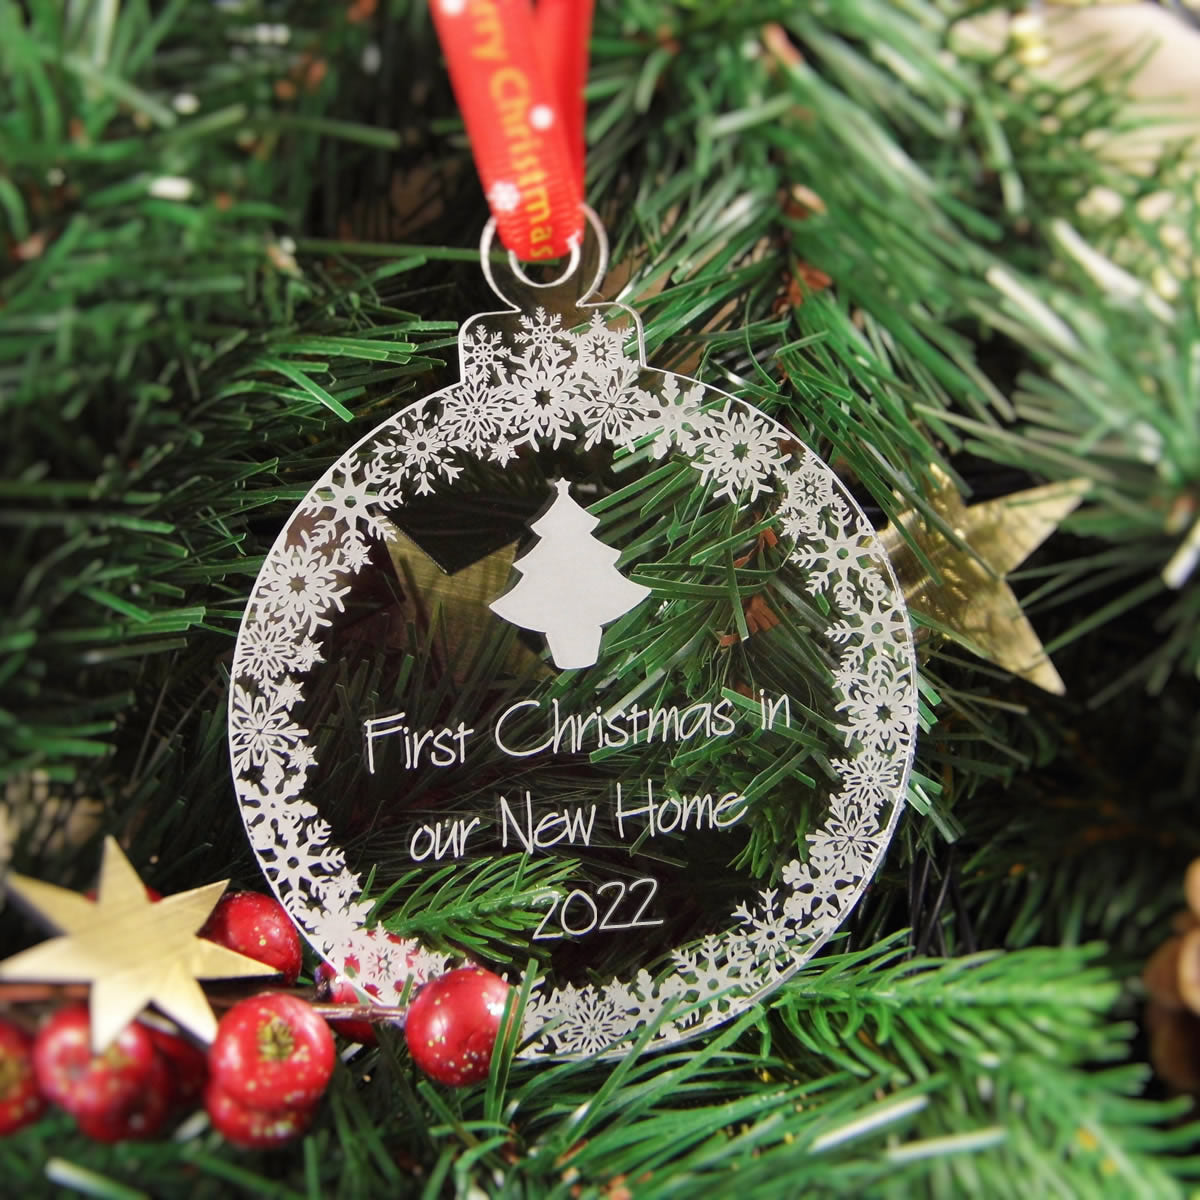 Personalised Christmas Tree Bauble - Christmas In Our New Home